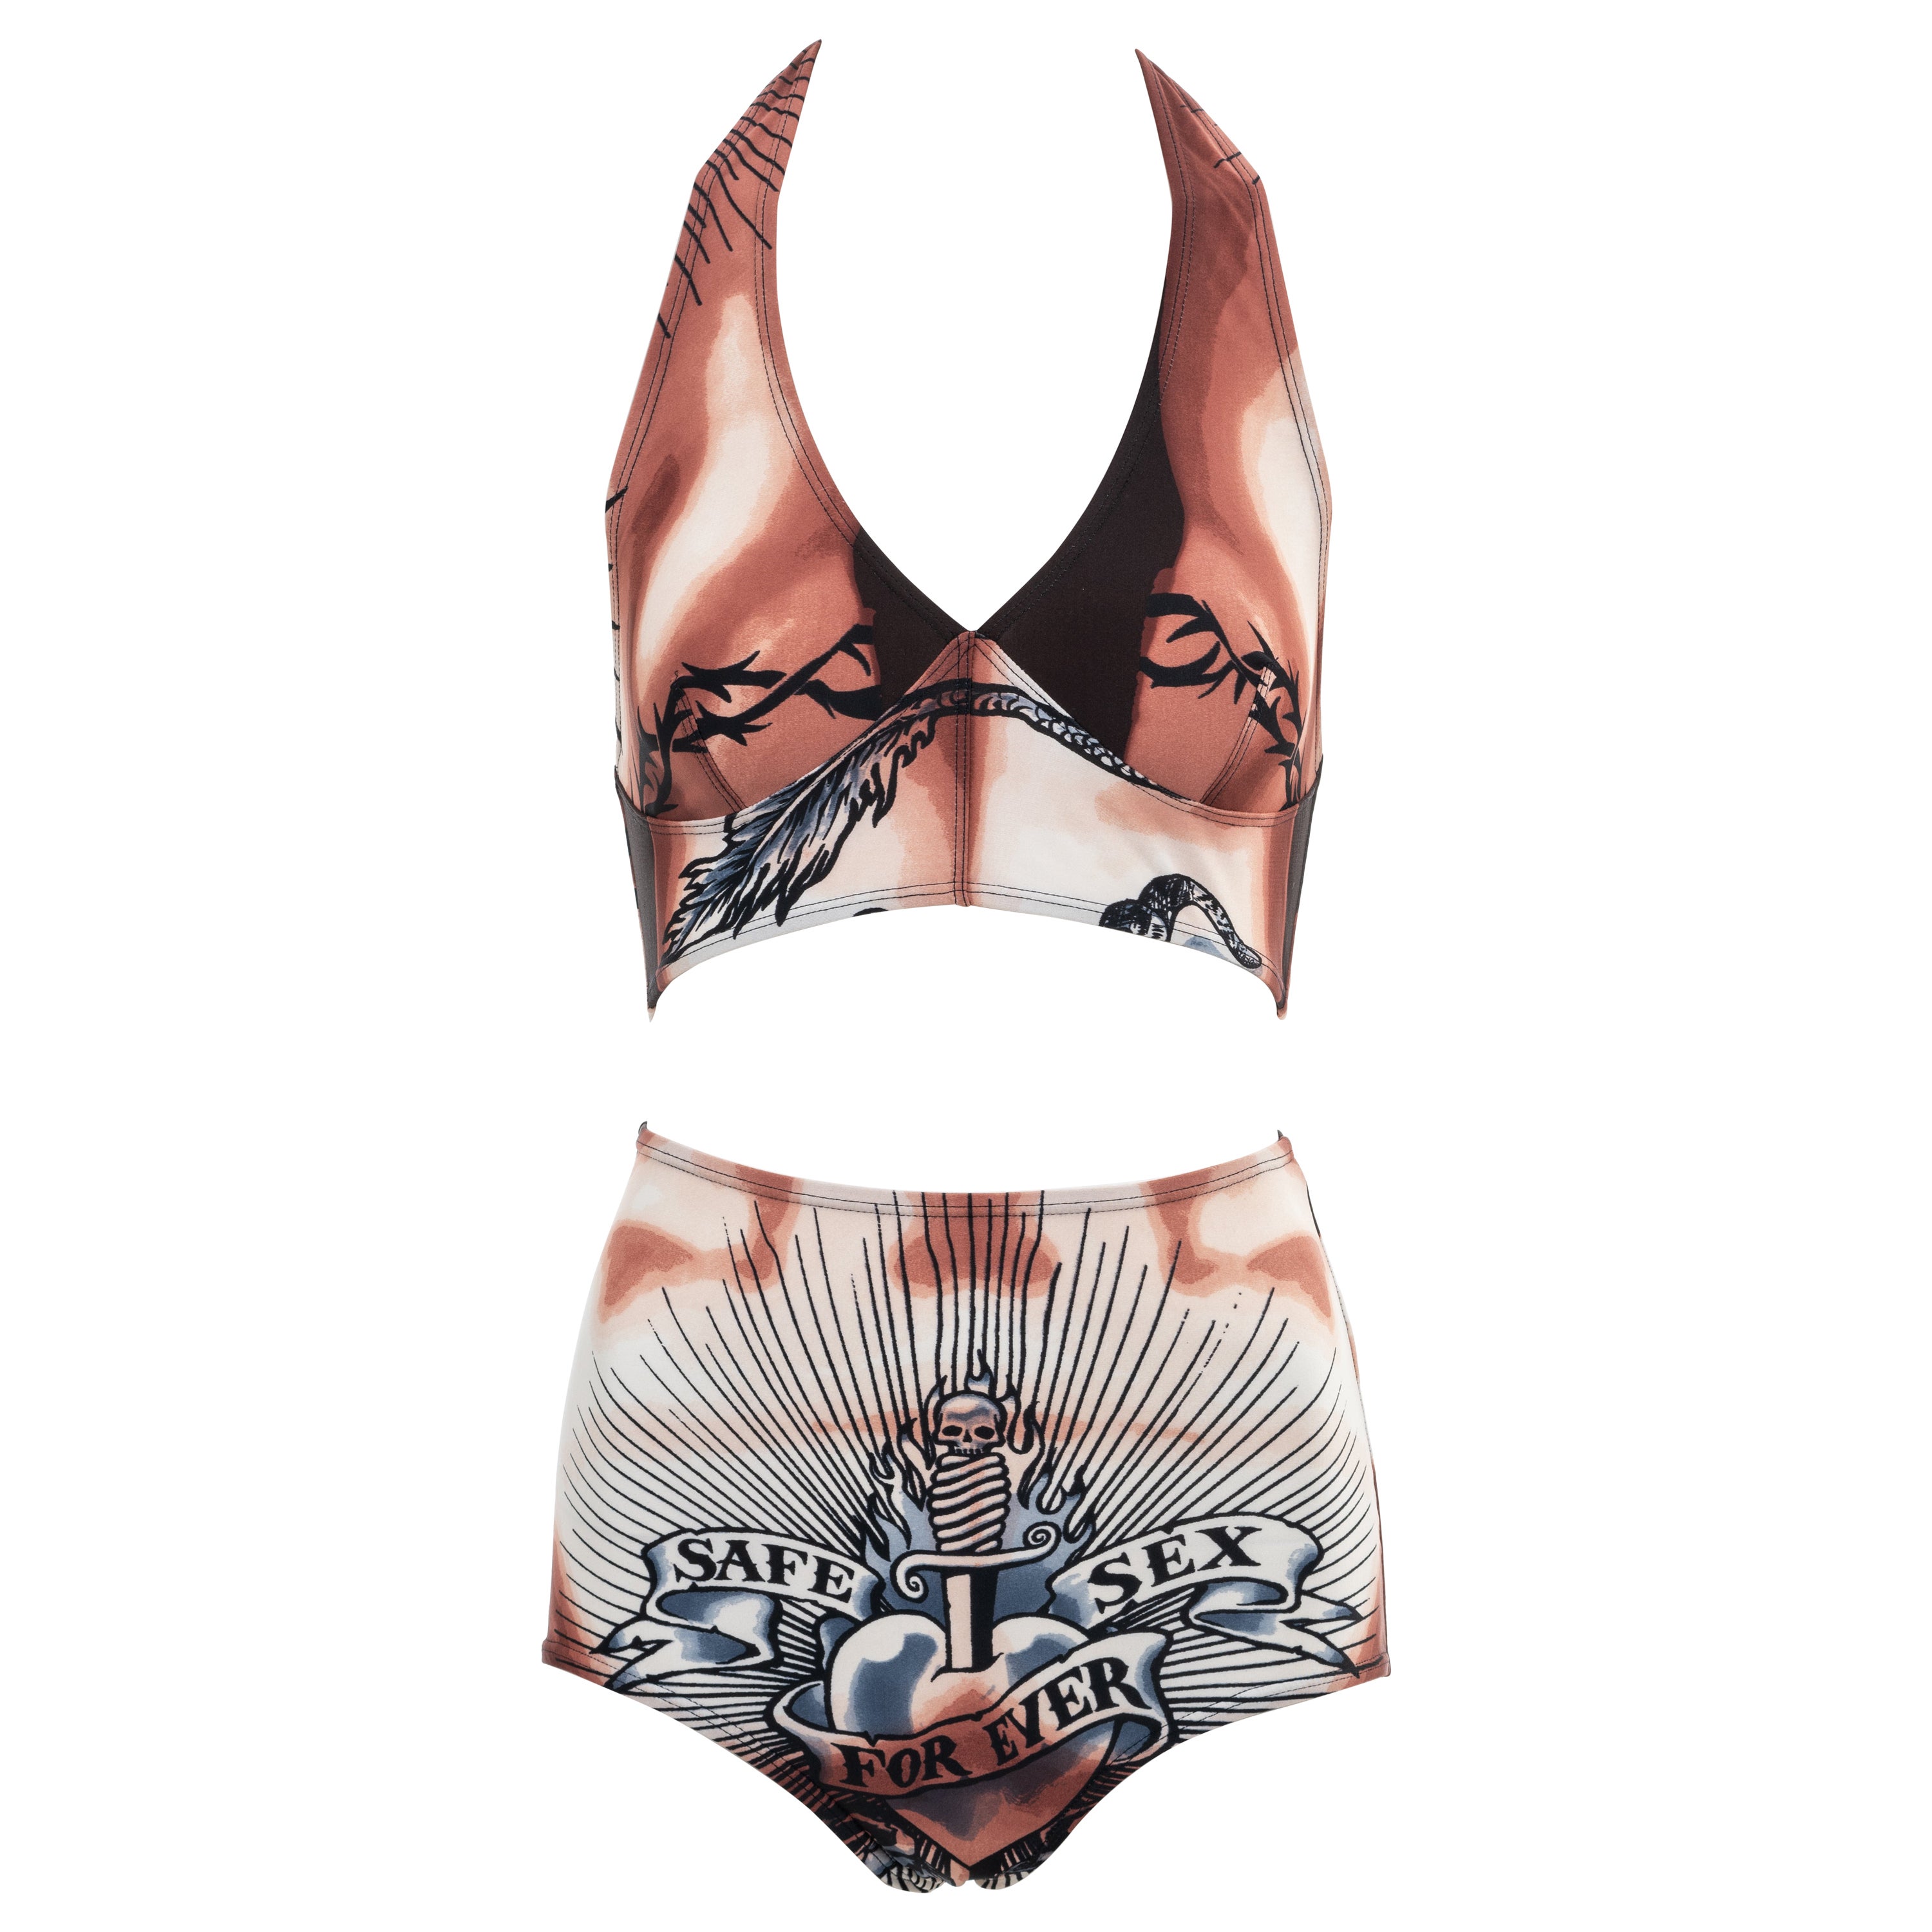 Jean Paul Gaultier 'Safe Sex Forever' tattoo print 2 piece set, ss 1996 For Sale